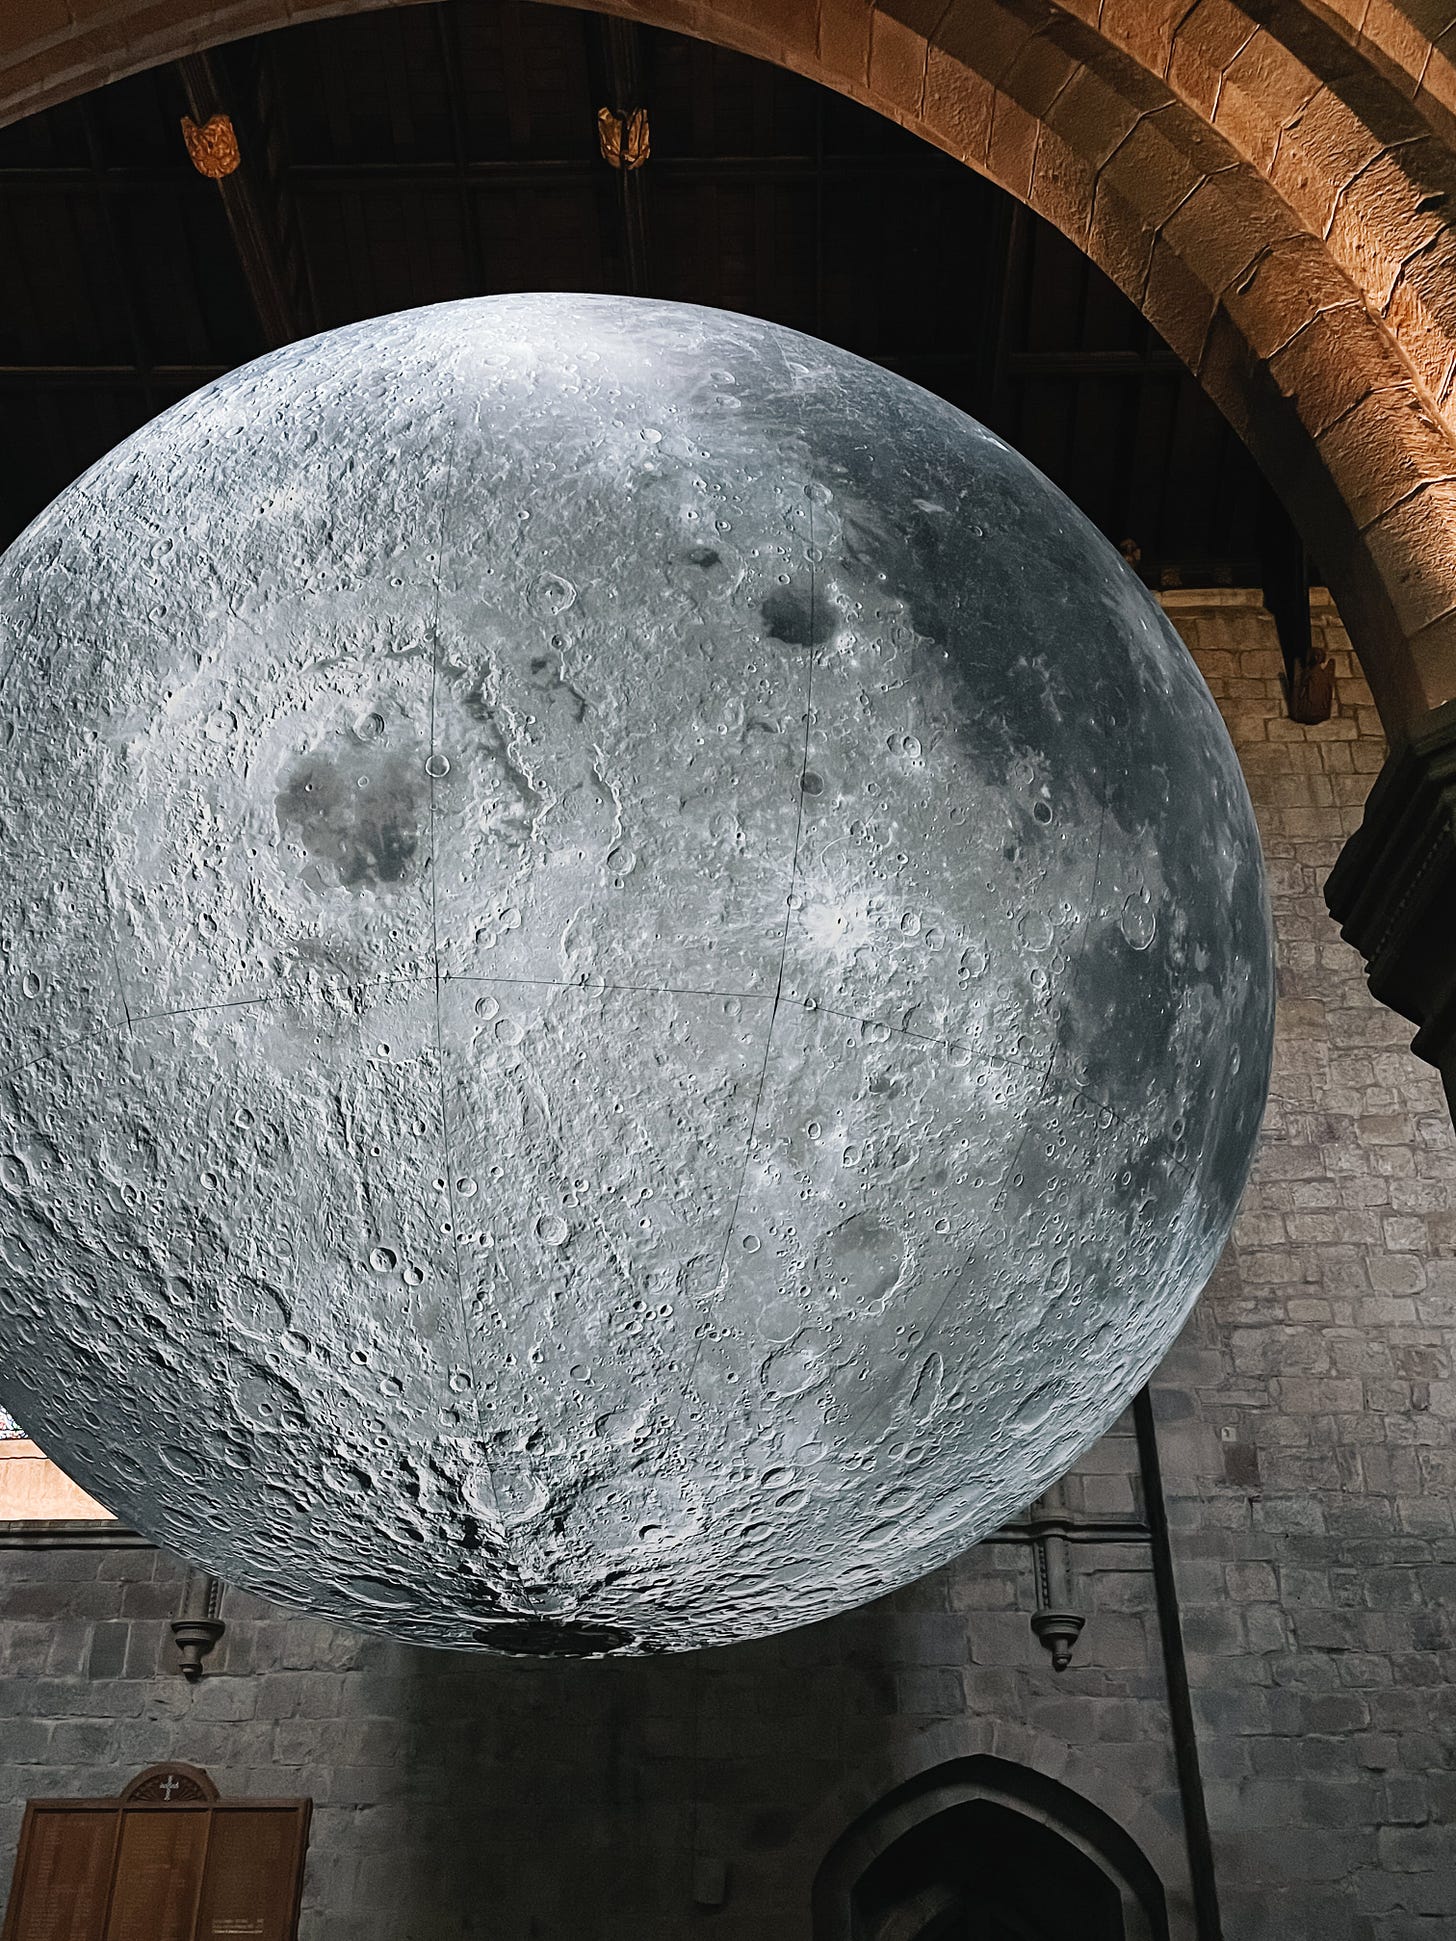 The stone archway of a church with a huge blowup ballon. Projected onto the balloon are images of the moon's craters.